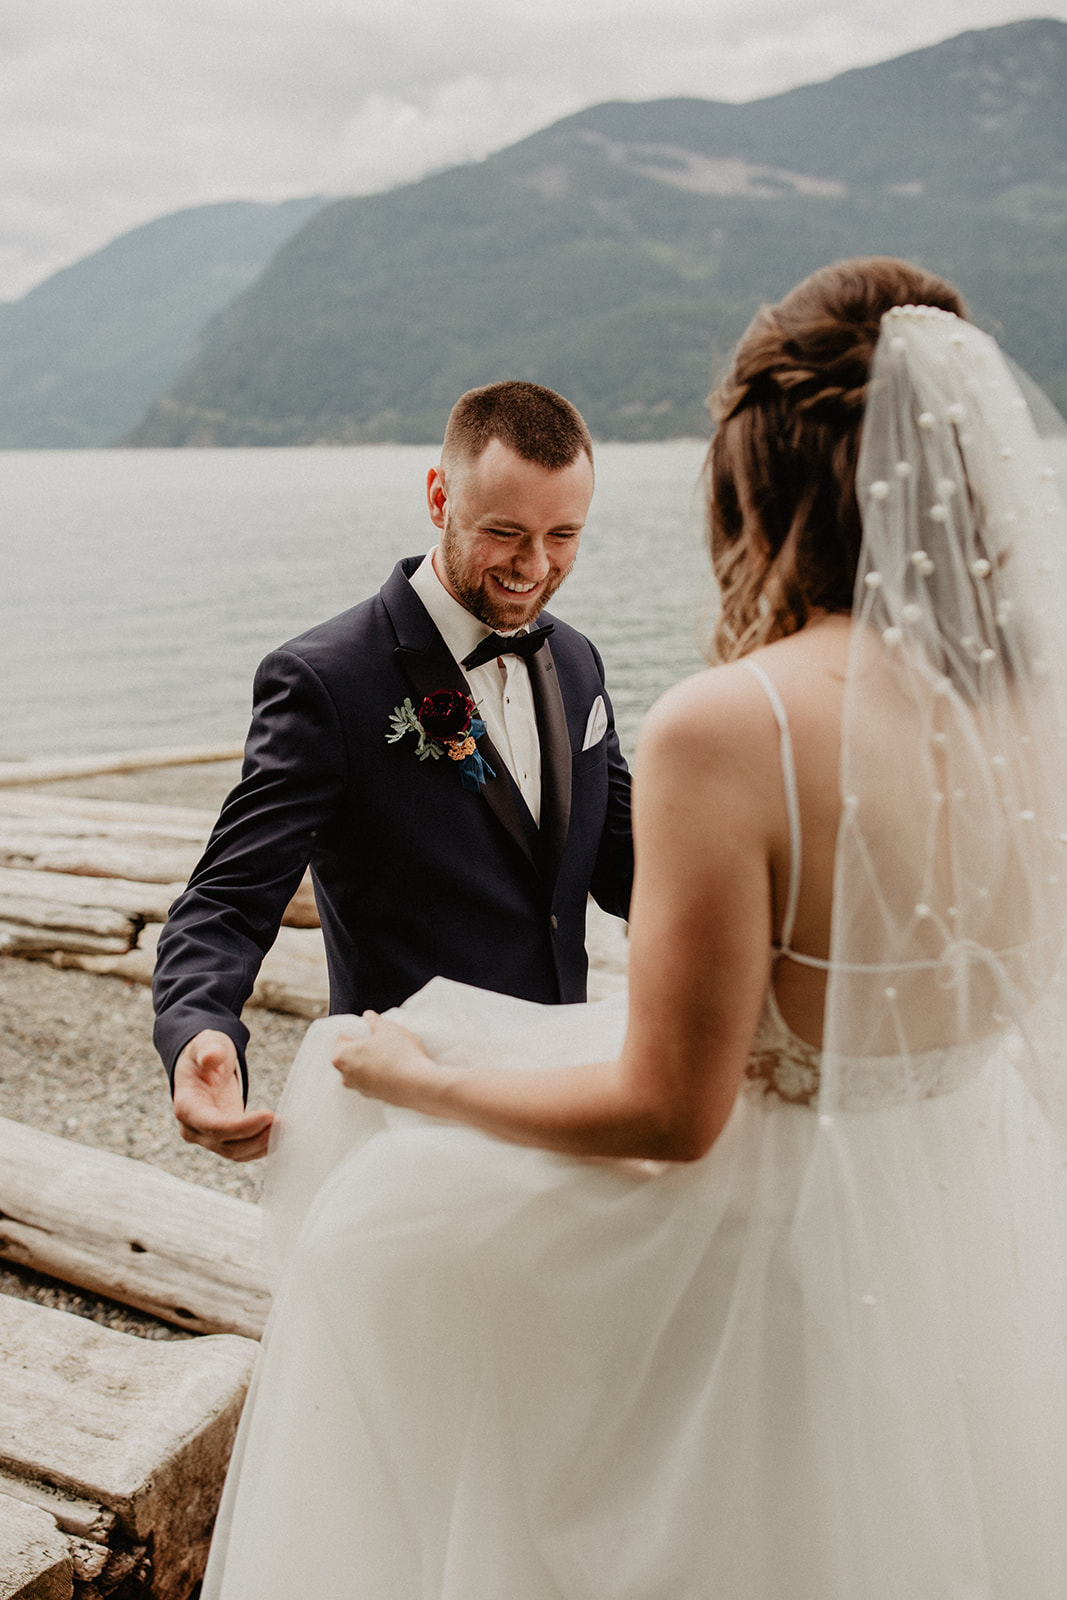 Bride and groom portraits at Vancouver along the Sea to Sky highway